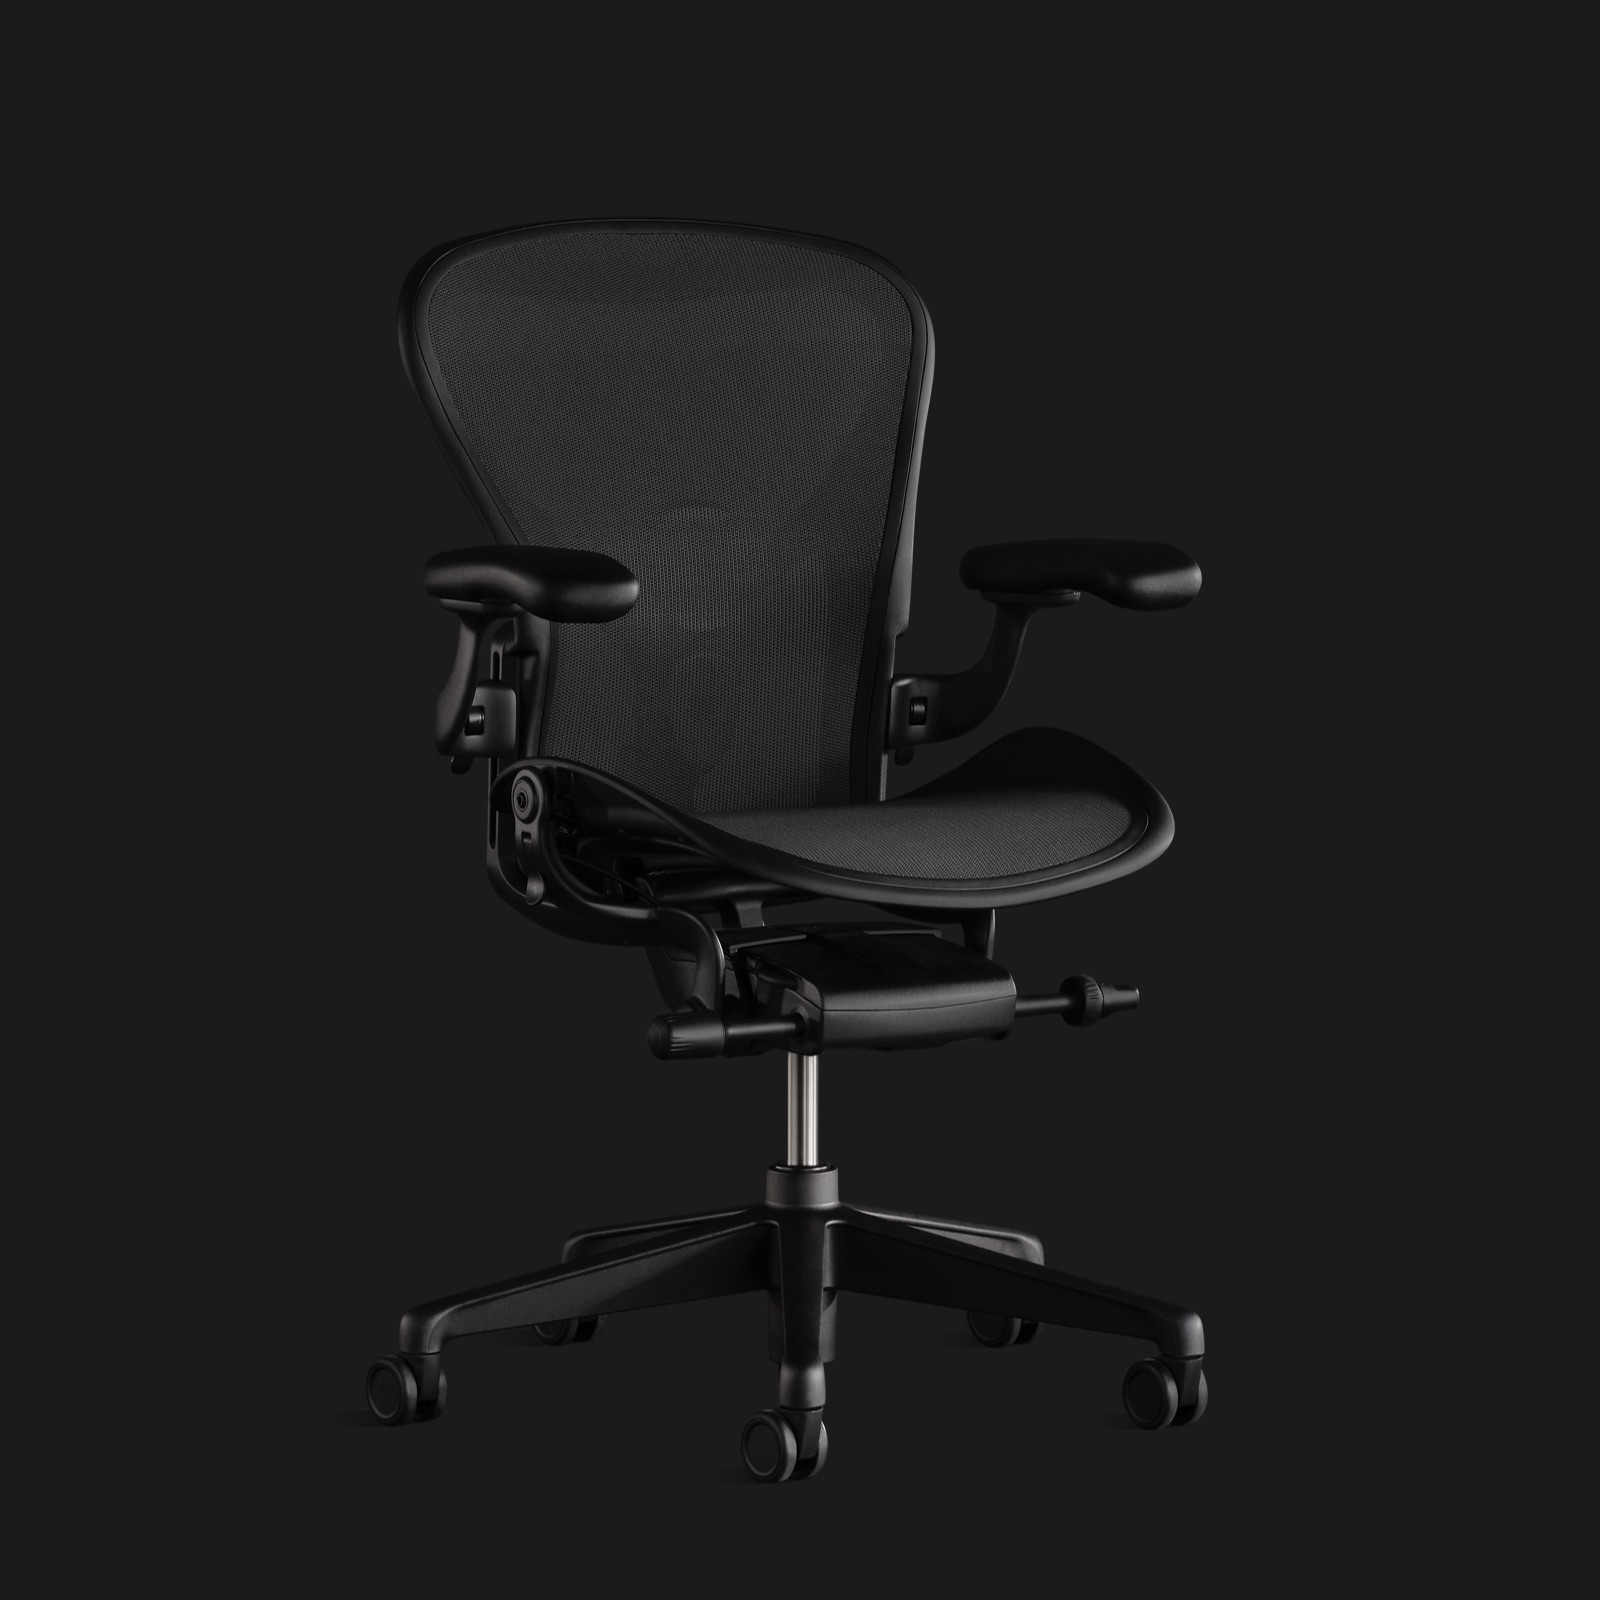 An Aeron Chair in all black against a black background, shown from the front at a slight angle.